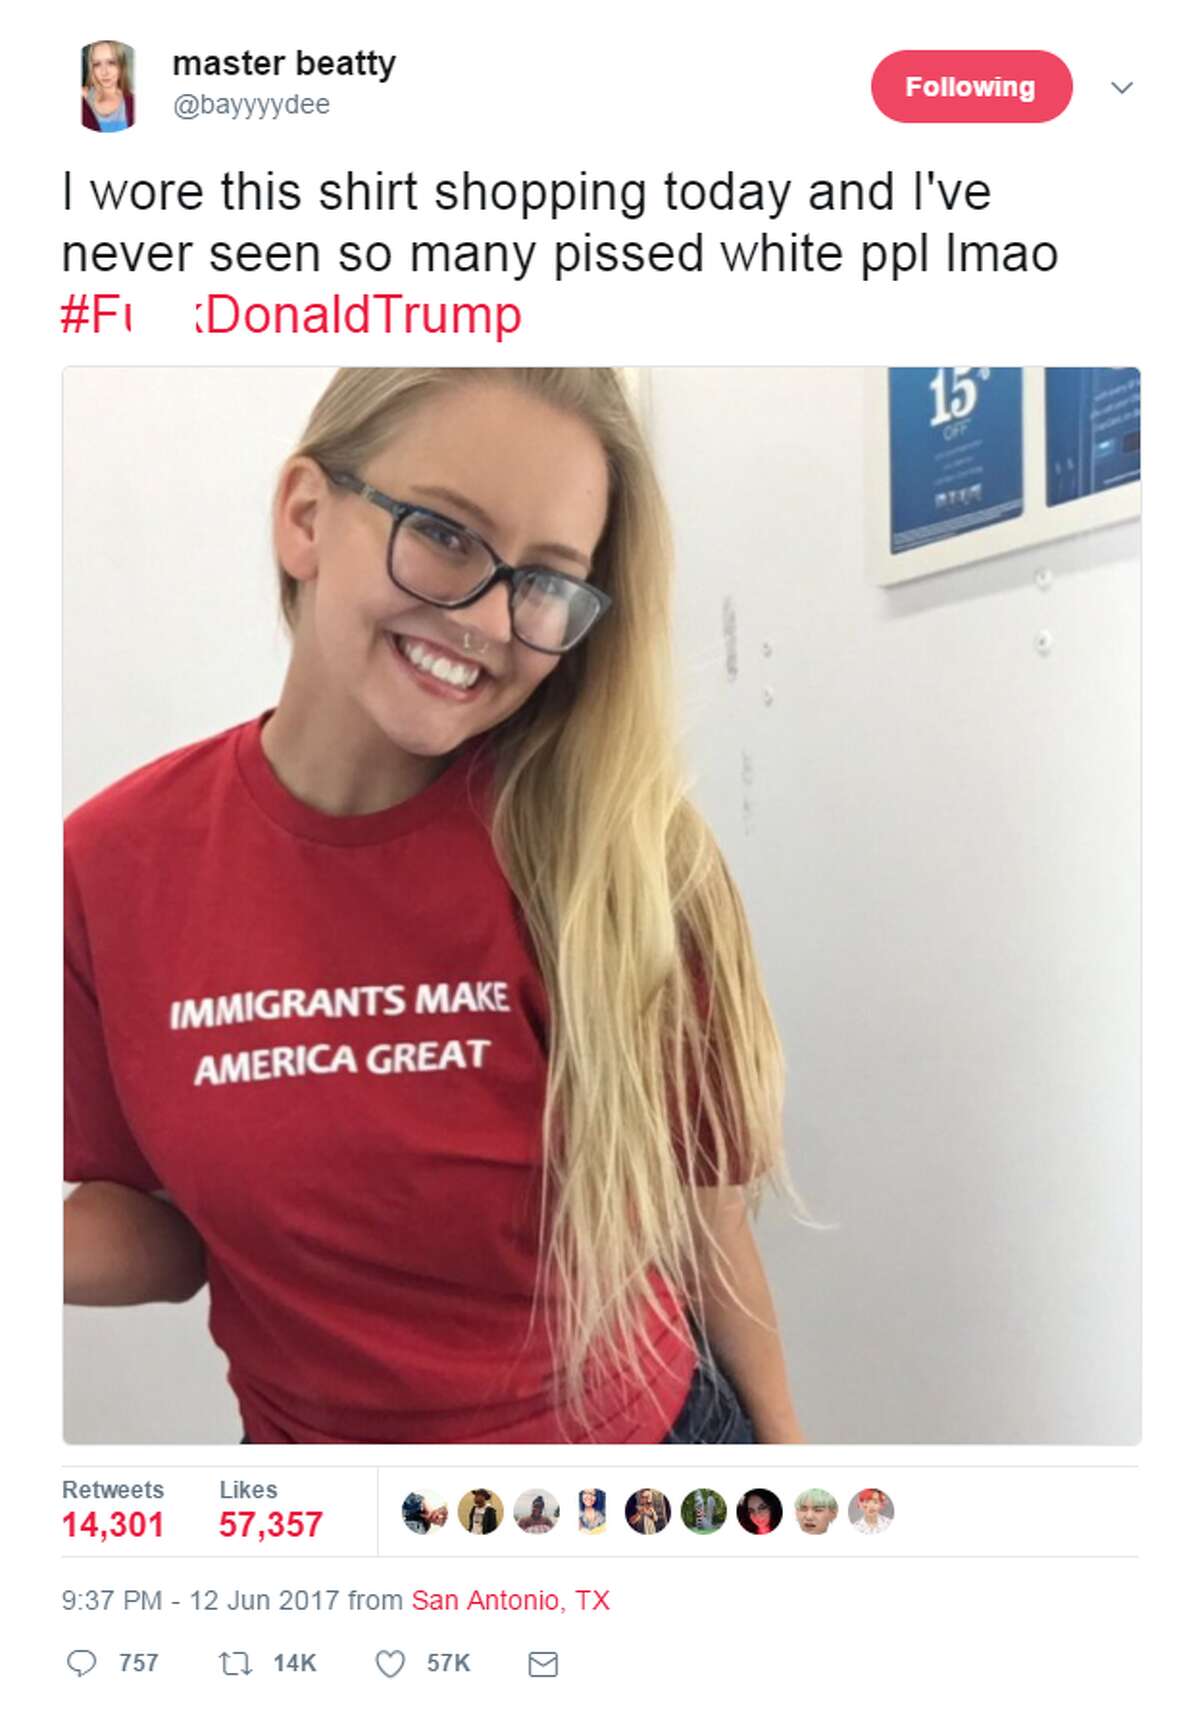 Beatty, a new Alamo City resident from rural Illinois, is the woman behind a tweet that has garnered more than 70,000 reactions in the form of likes, retweets and comments. The June 12 tweet comes with a smiling selfie, wearing a shirt emblazoned with the phrase "IMMIGRANTS MAKE AMERICA GREAT," drawing from Trump's campaign promise to "Make America Great Again."